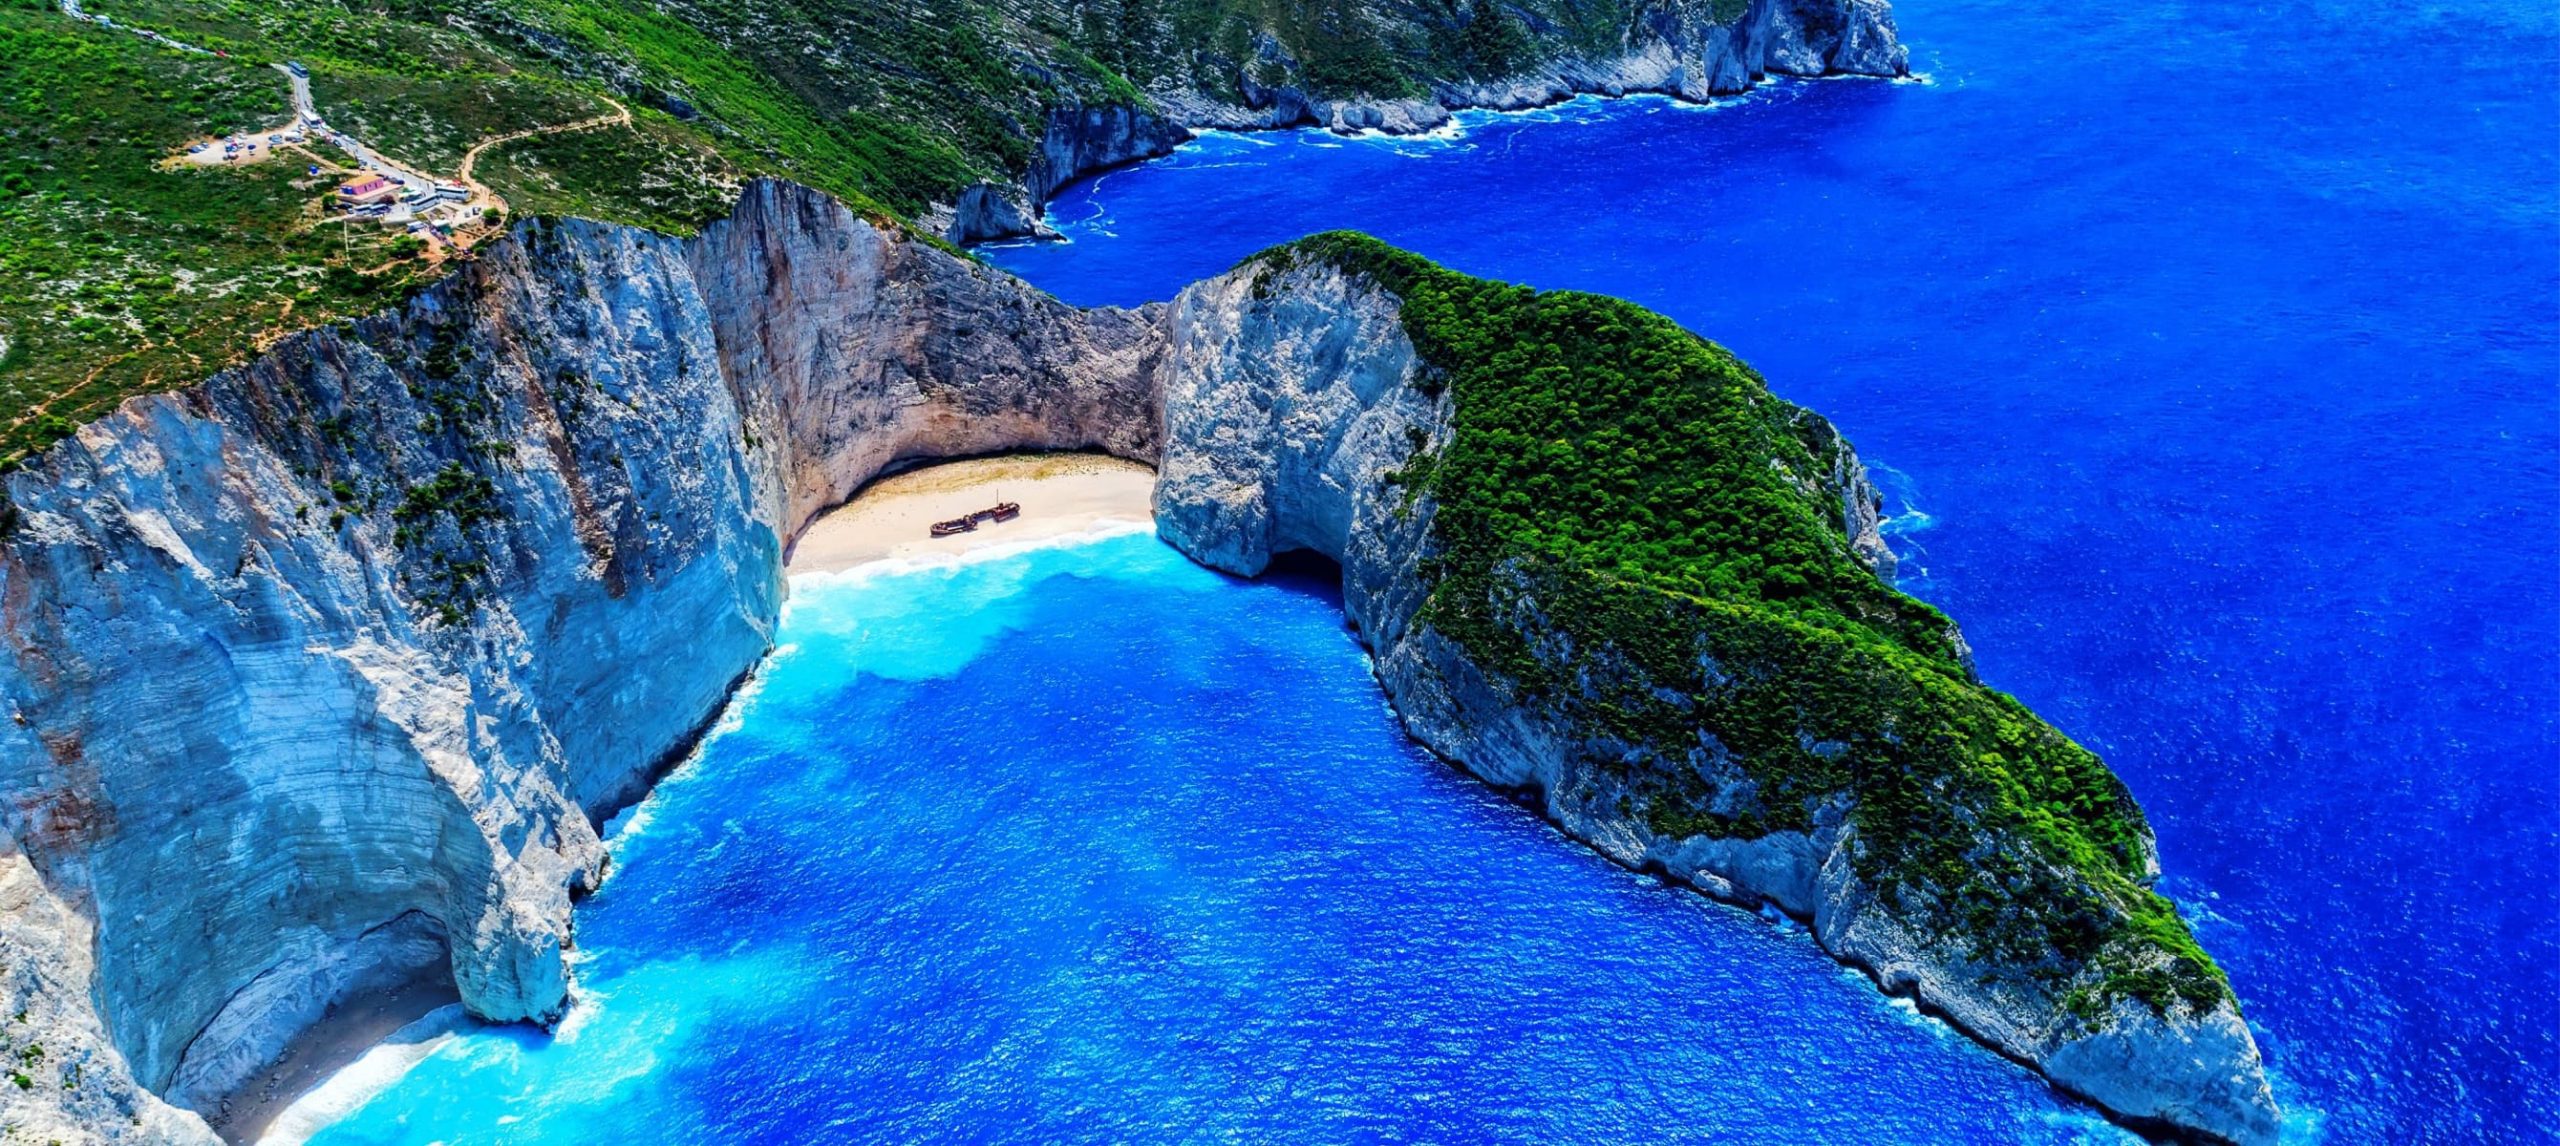 10 Of The Best Beaches In Greece